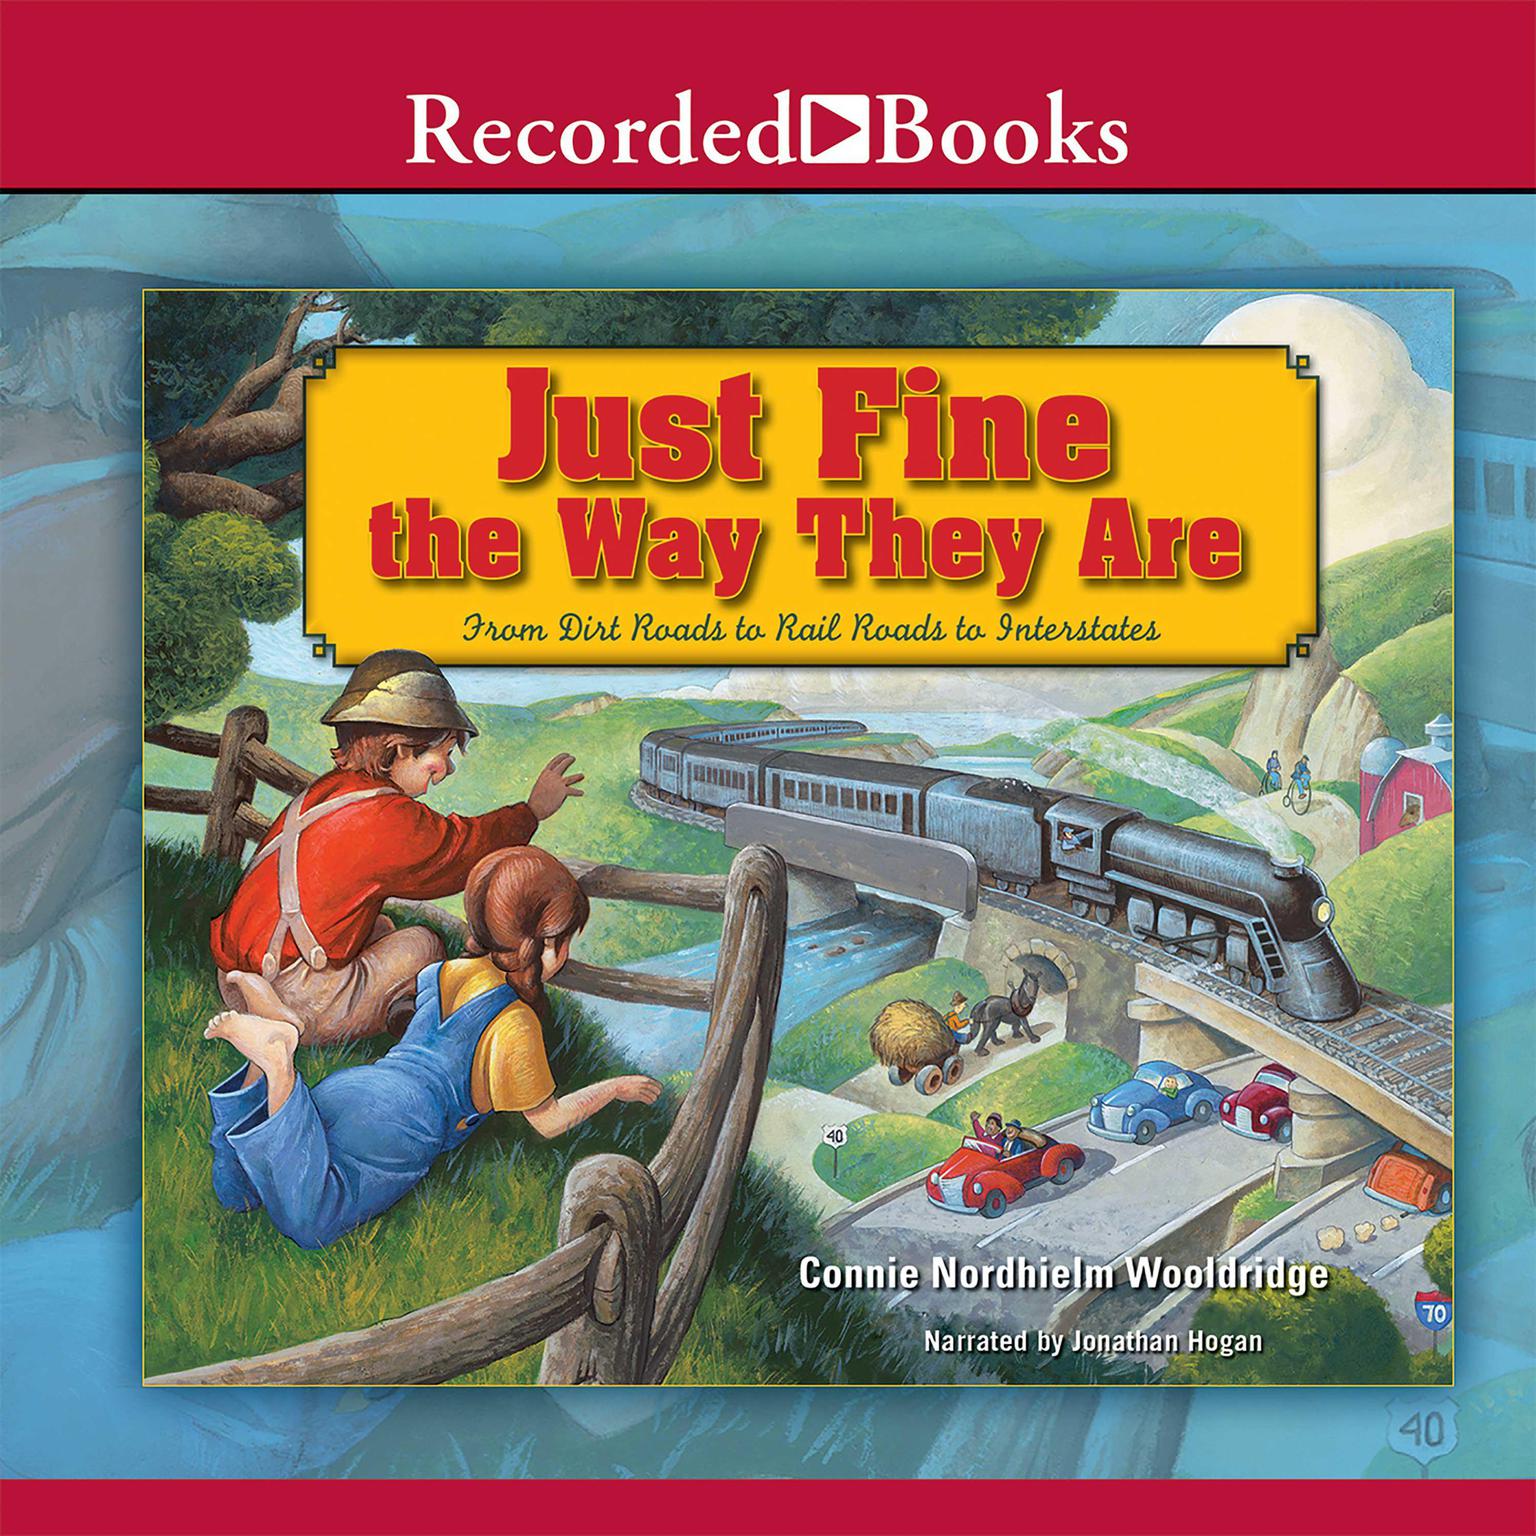 Just Fine the Way They Are: From Dirt Roads to Rail Roads to Interstates Audiobook, by Connie Nordhielm Wooldridge